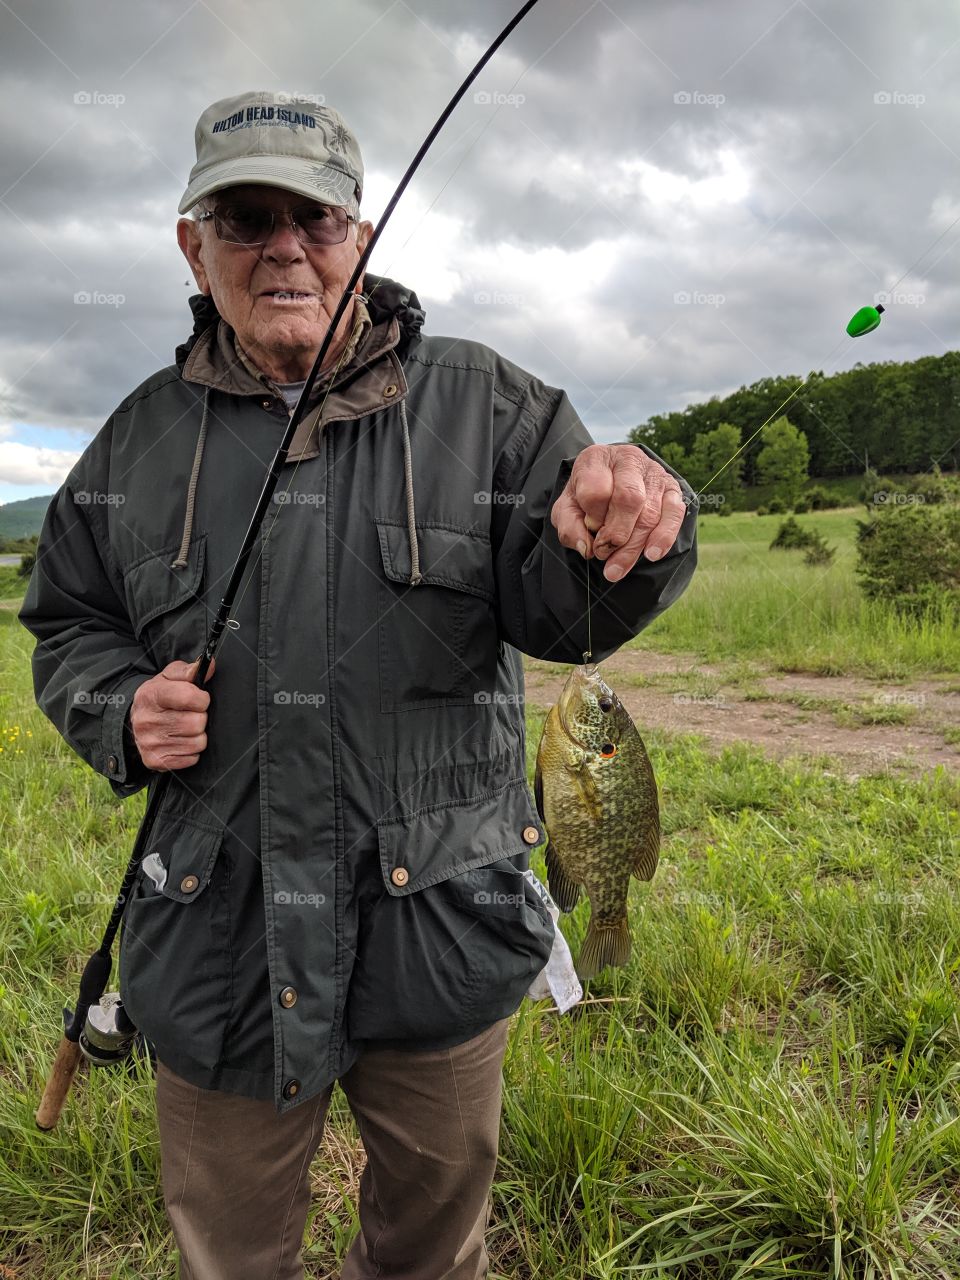 Grampa catching crappie in Kimpsey Lake, Lost River, West Virginia